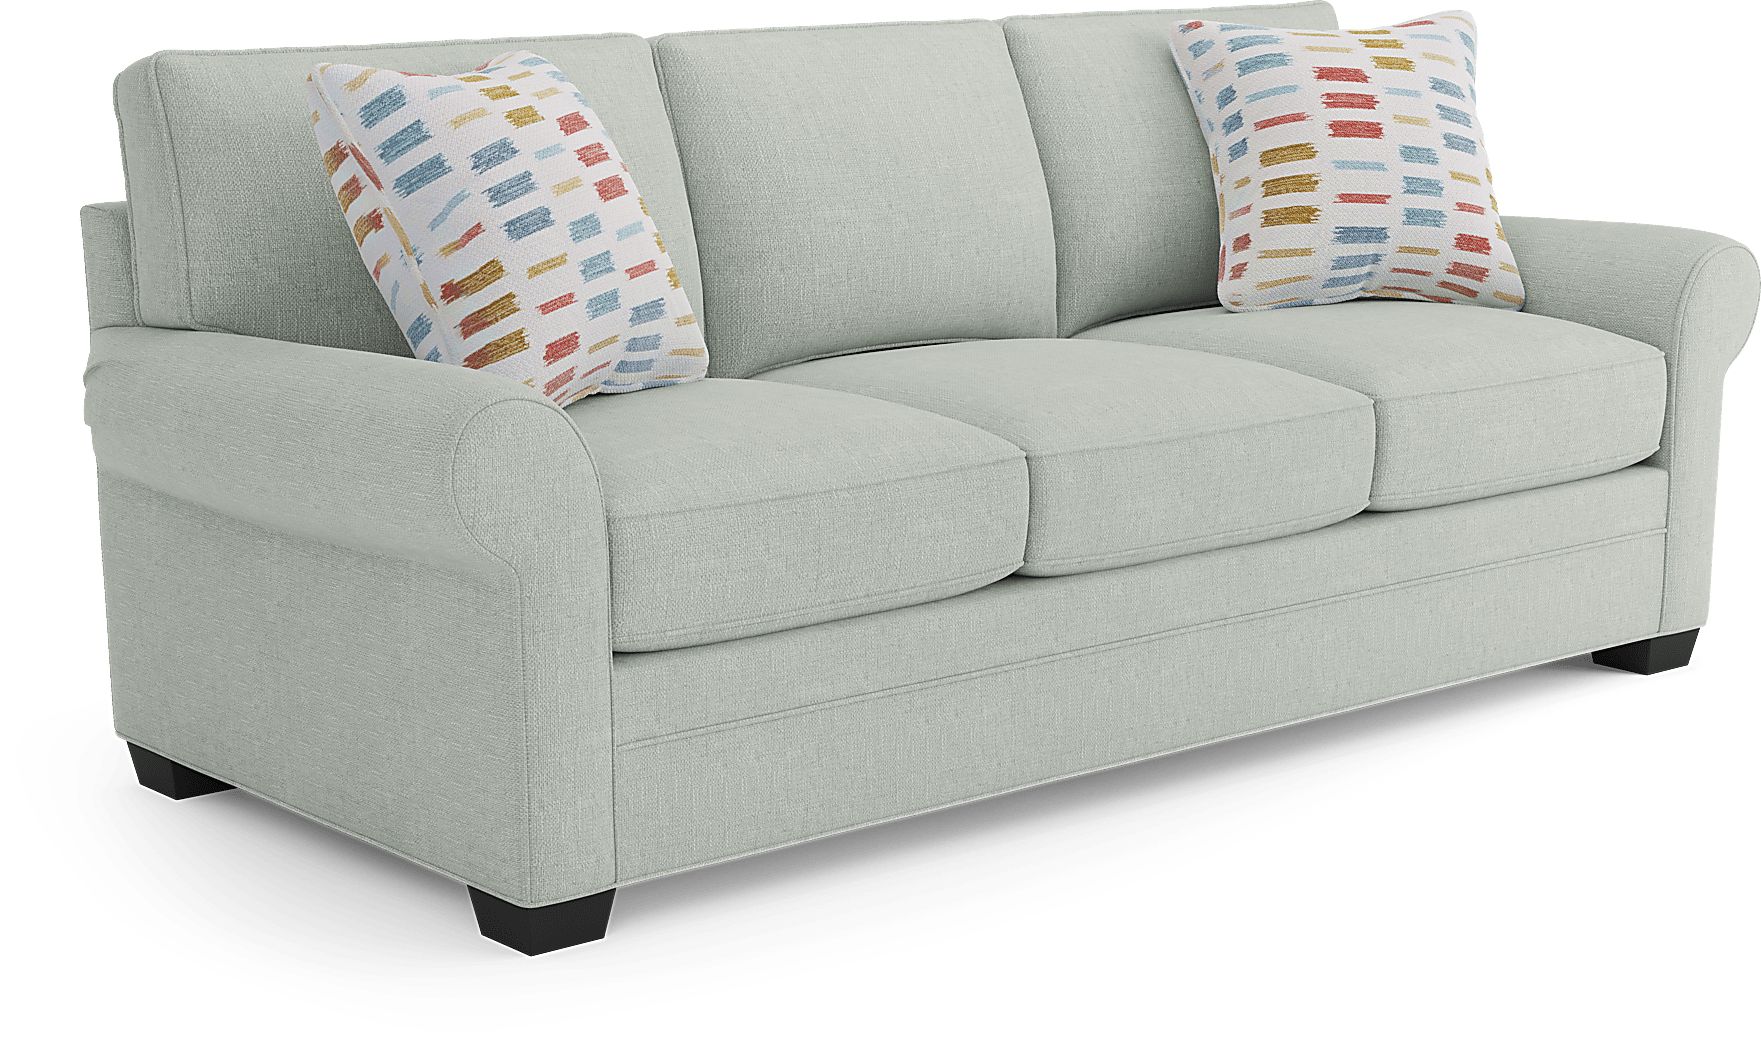 Cindy Crawford Home Bellingham Willow Green Textured Sofa